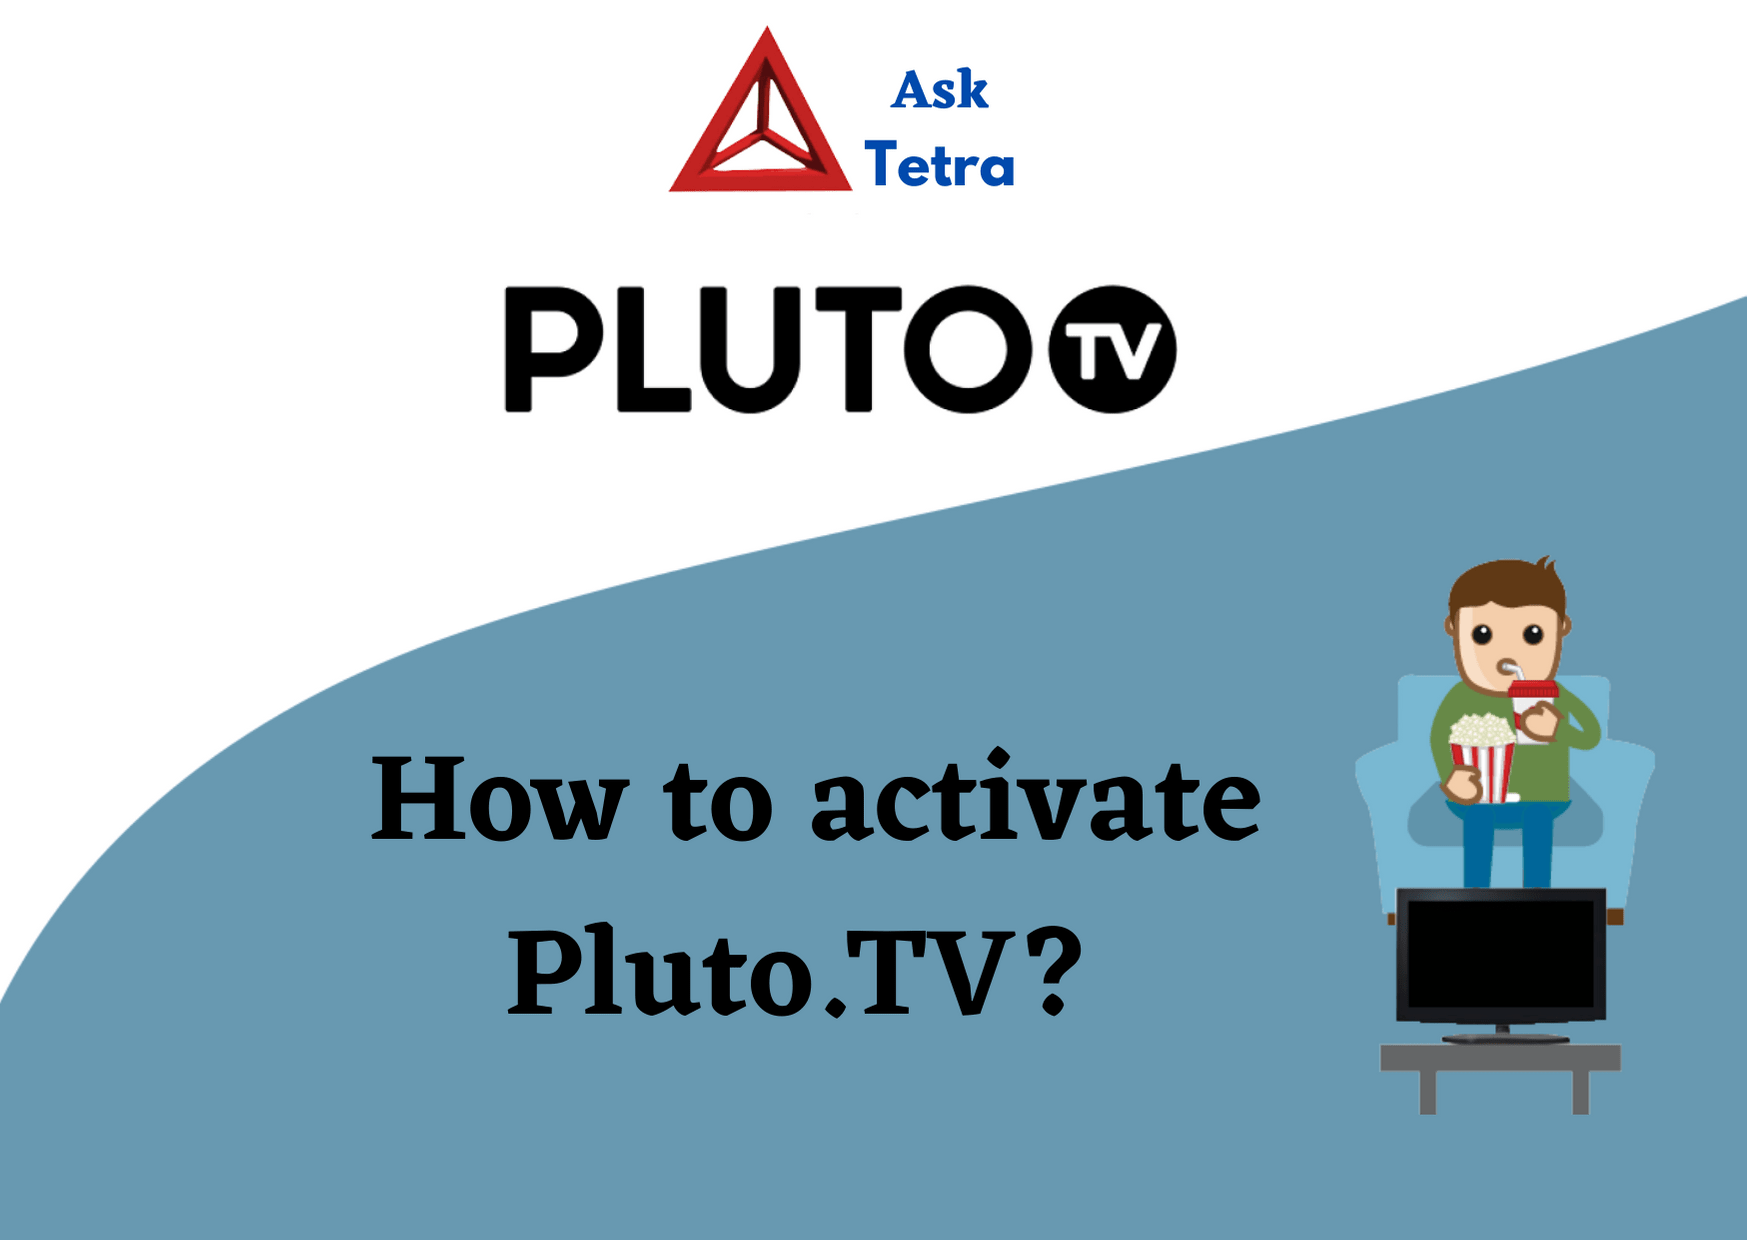 How to Activate Pluto.tv? Using Pluto.tv/Activate URL (2020)